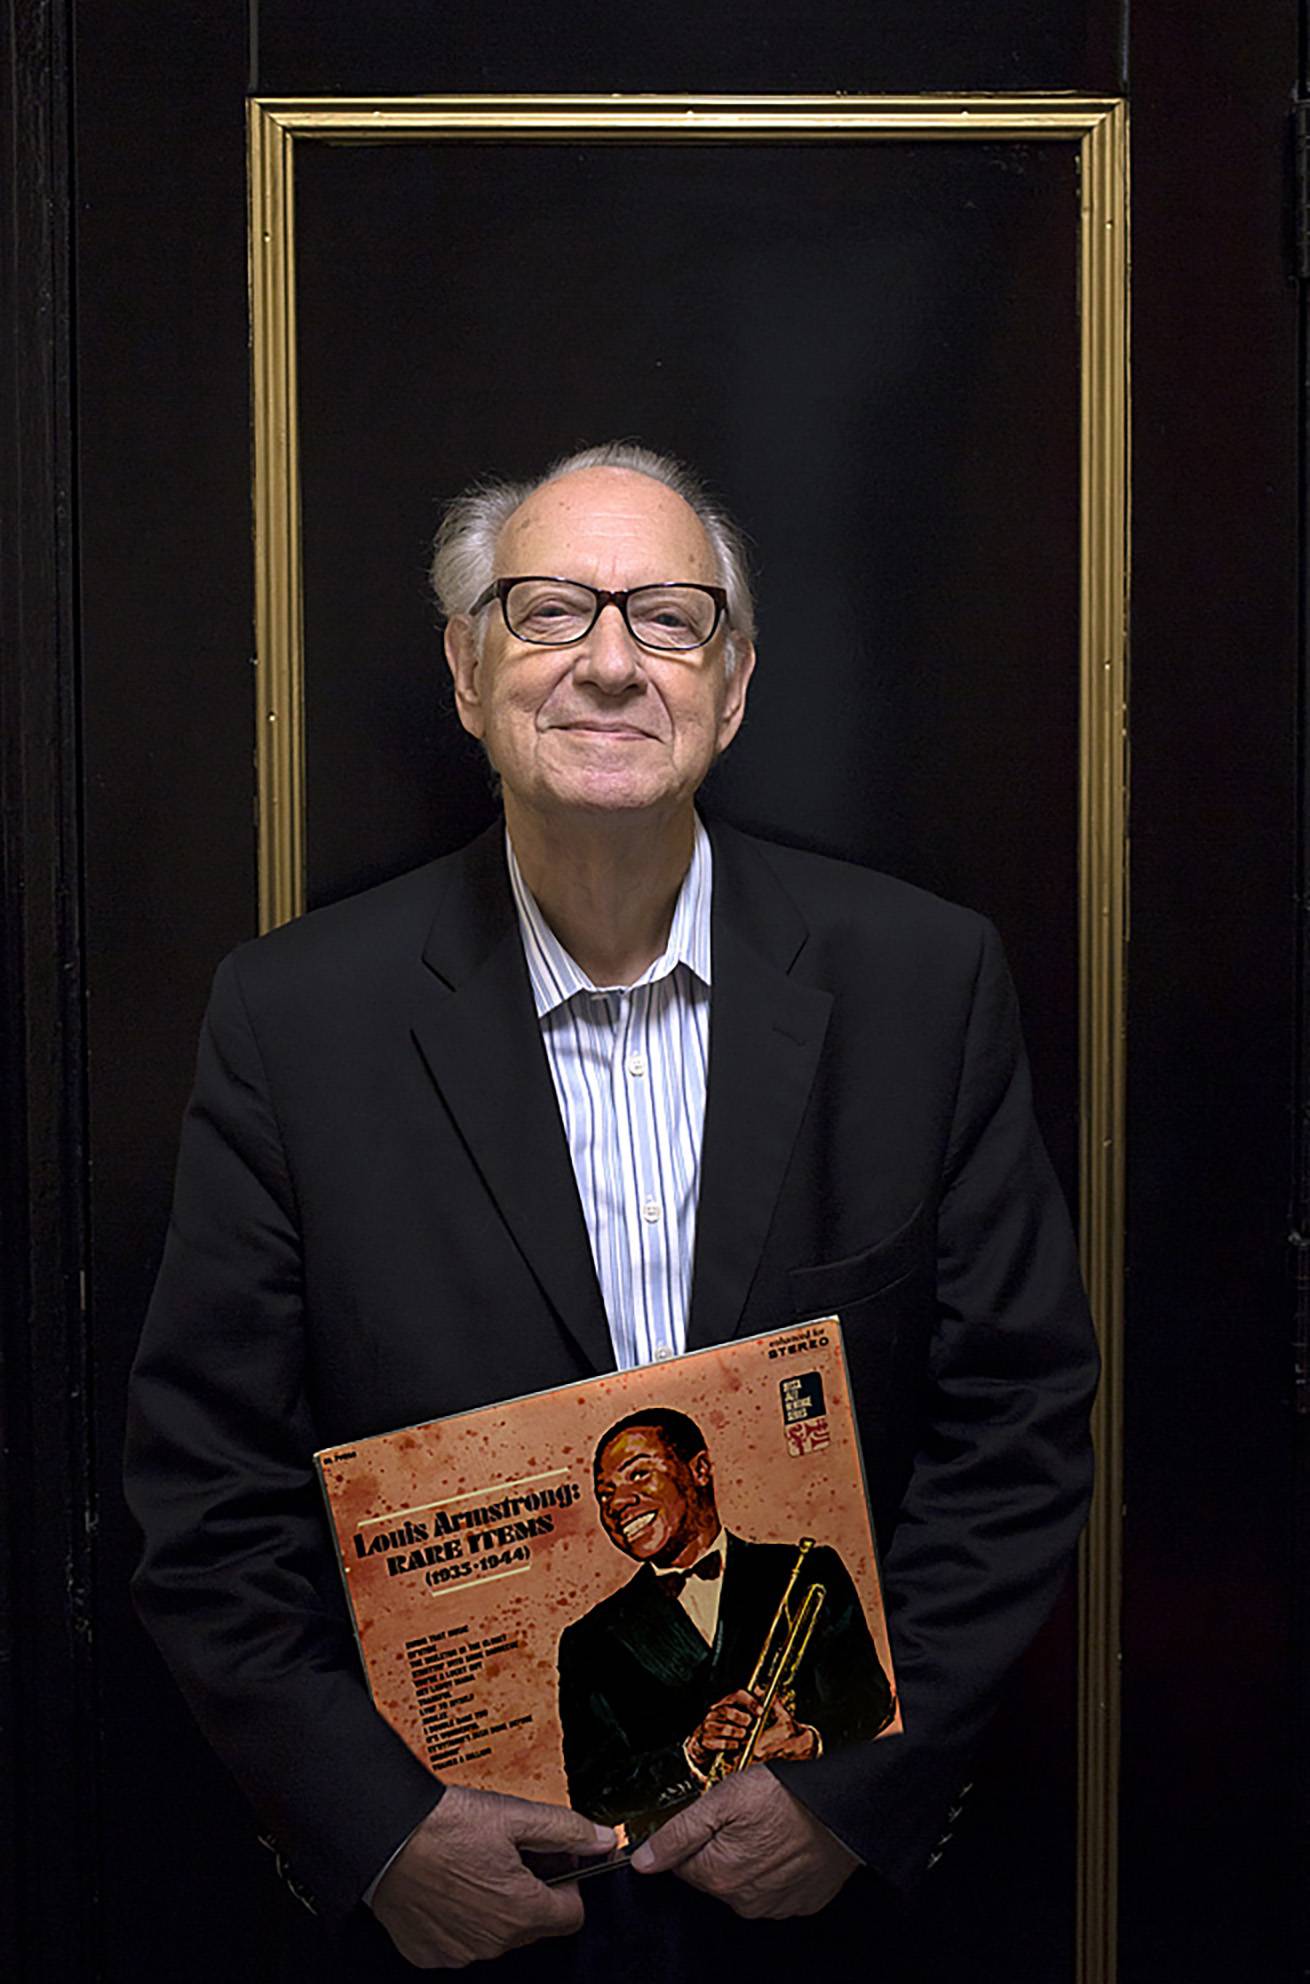 Dan Morgenstern with Louis Armstrong record